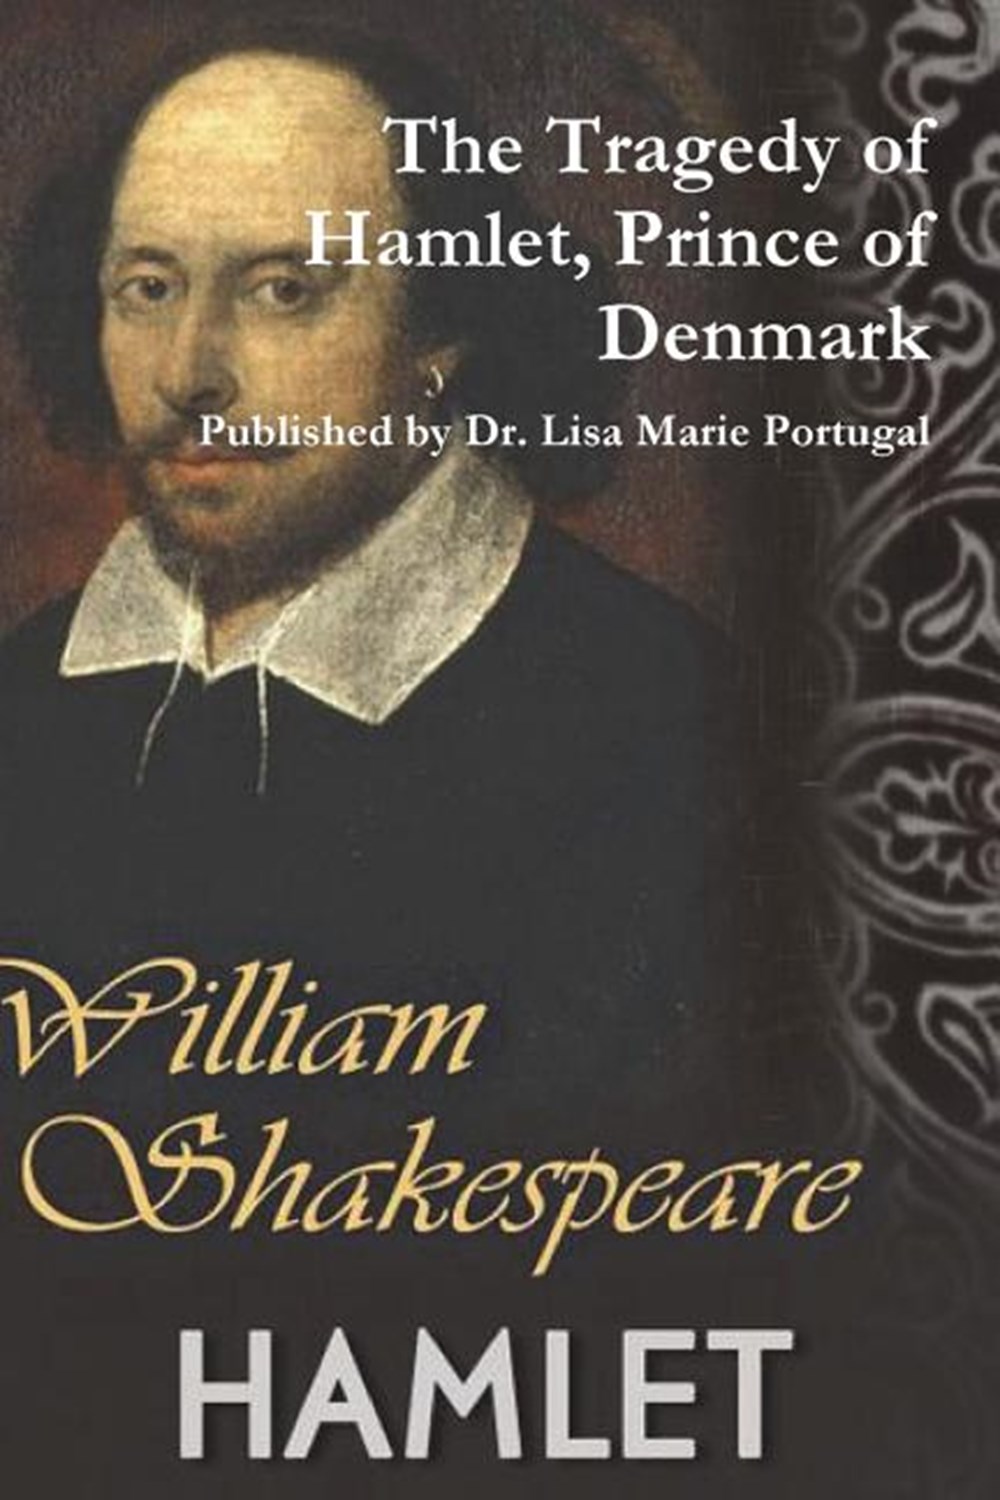 Tragedy of Hamlet, Prince of Denmark by William Shakespeare